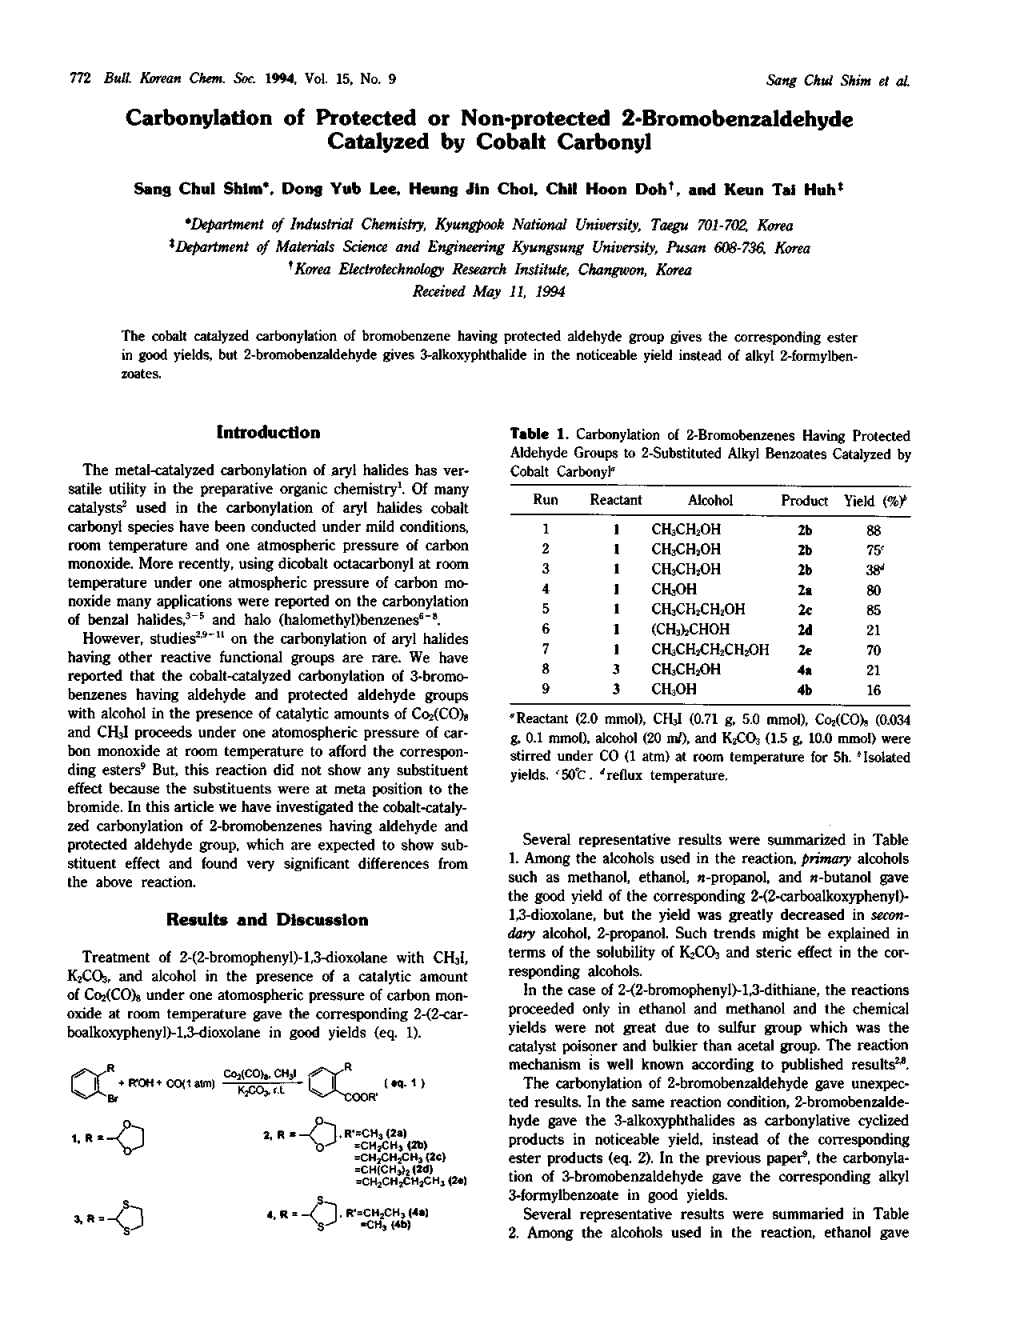 Carbonylation of Protected Or Non-Protected 2-Bromobenzaldehyde Catalyzed by Cobalt Carbonyl